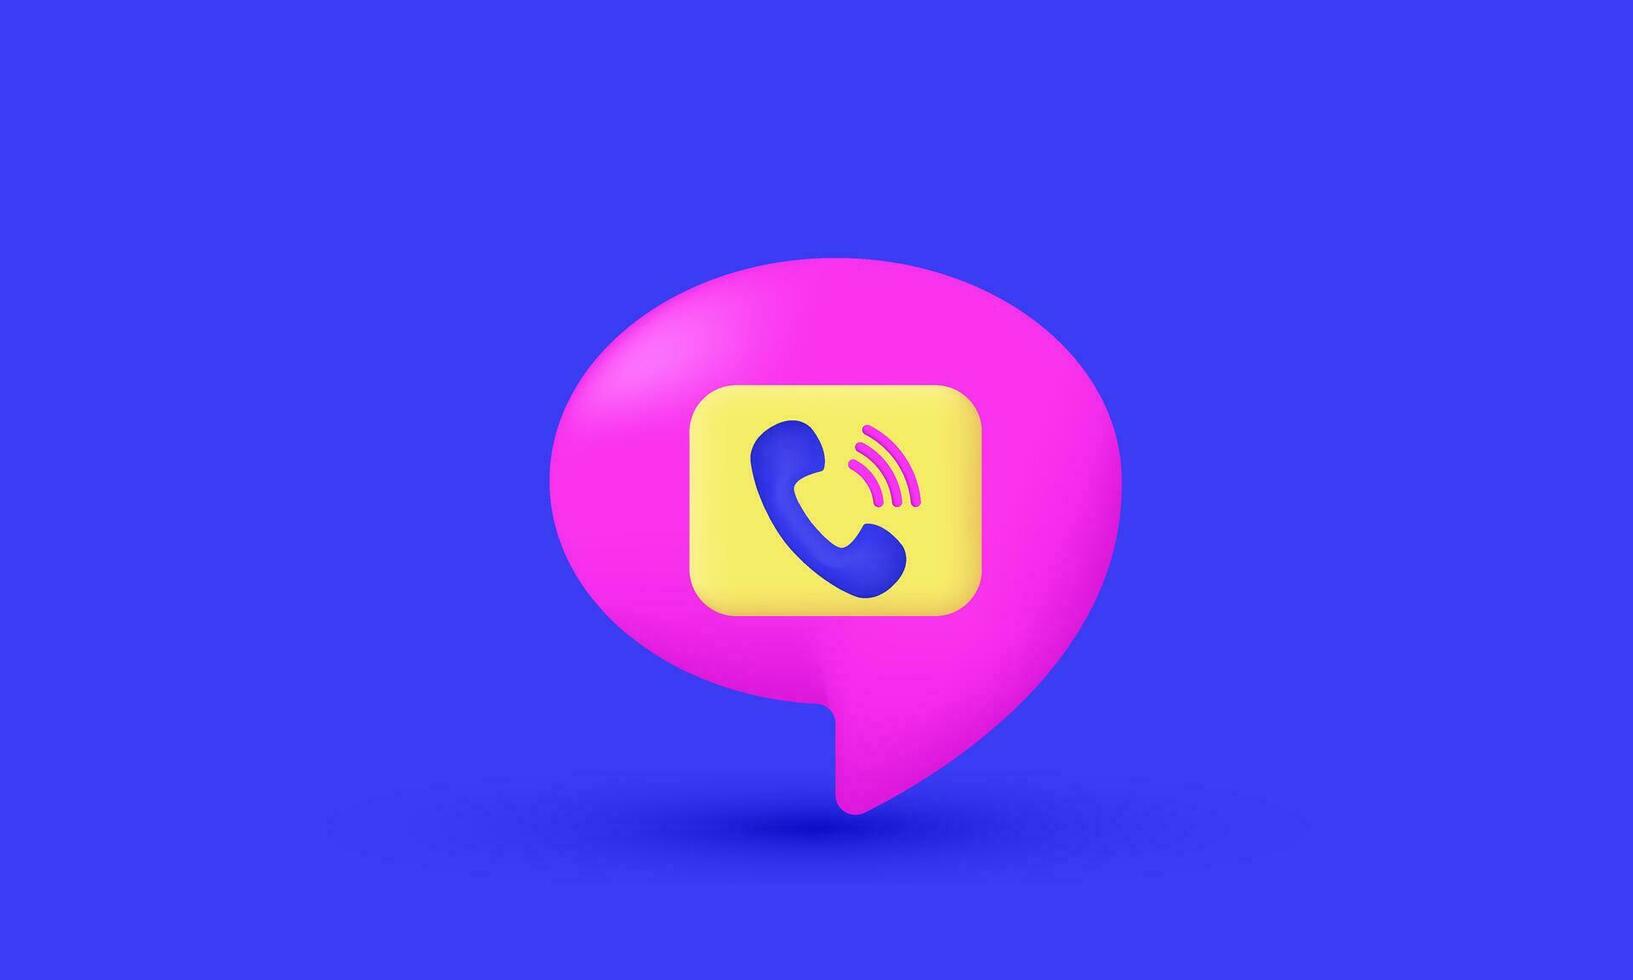 3d realistic cartoon phone handset speech bubble creative icon trendy modern style object symbols isolated on background vector